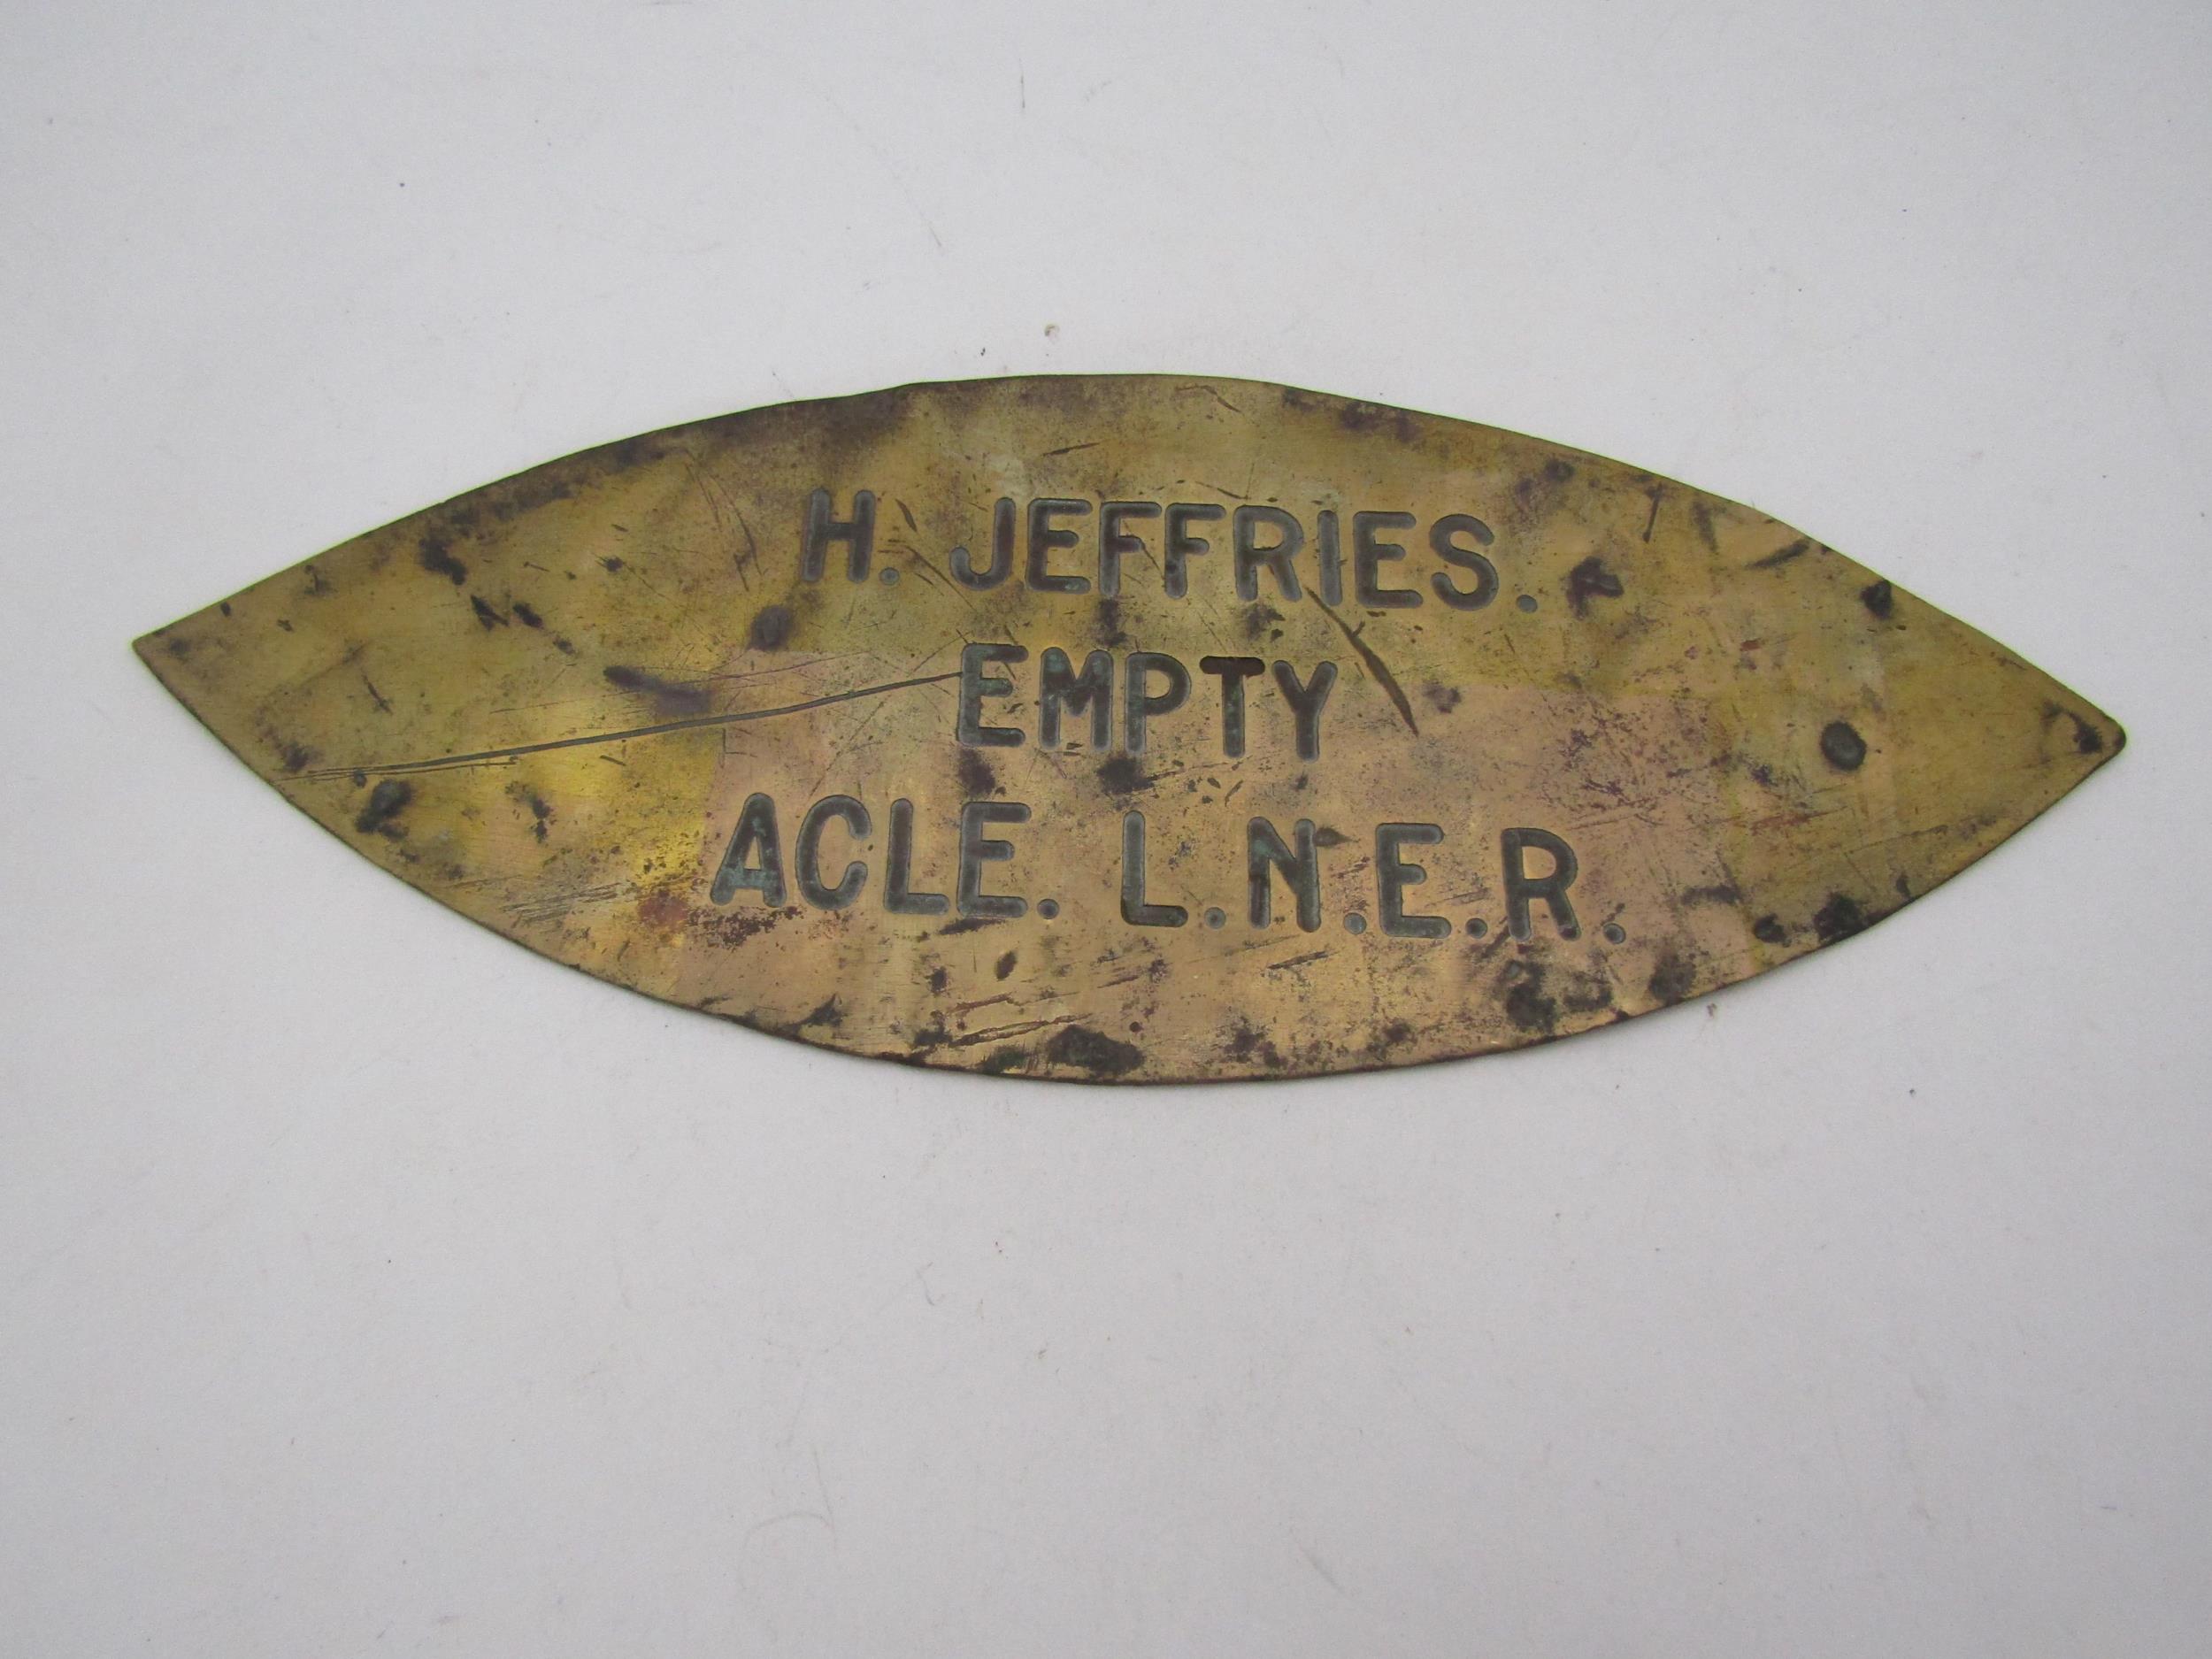 A brass wagon plate - H. JEFFRIES Empty, Acle LNER